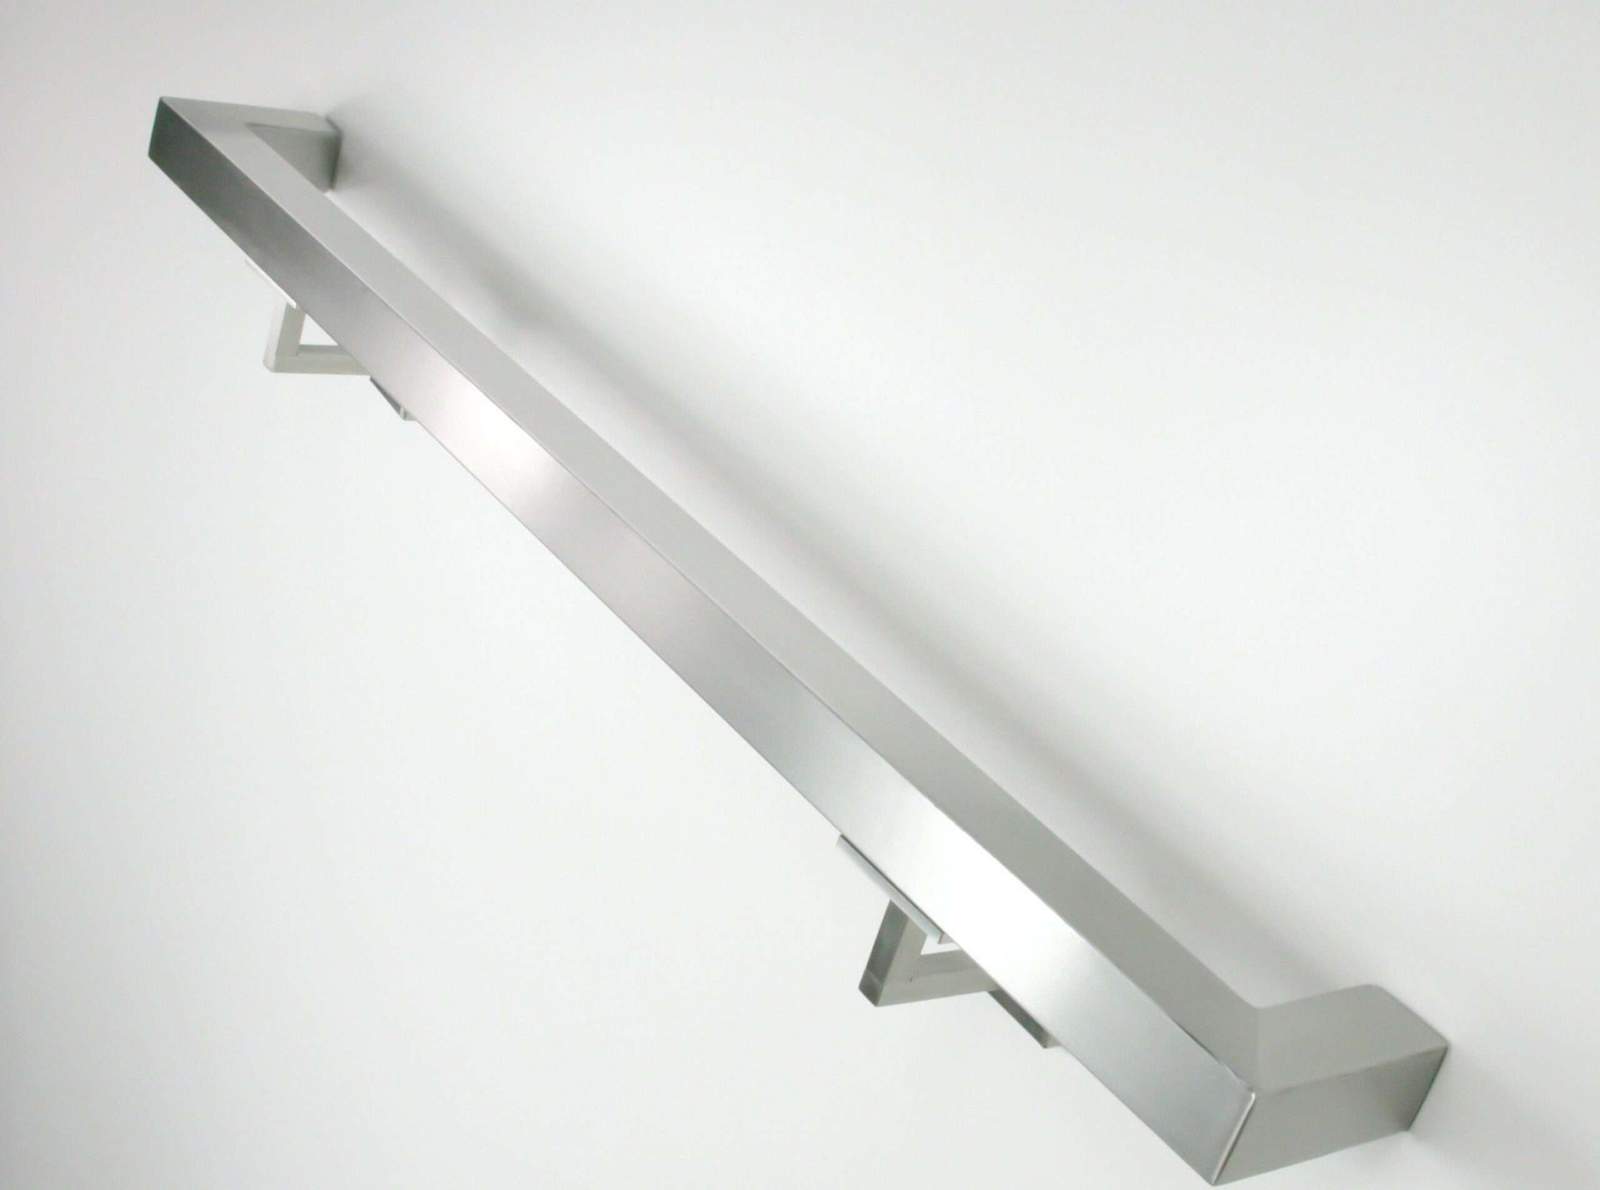 Stainless steel SS brushed nickel modern square ADA handrail – 174 in